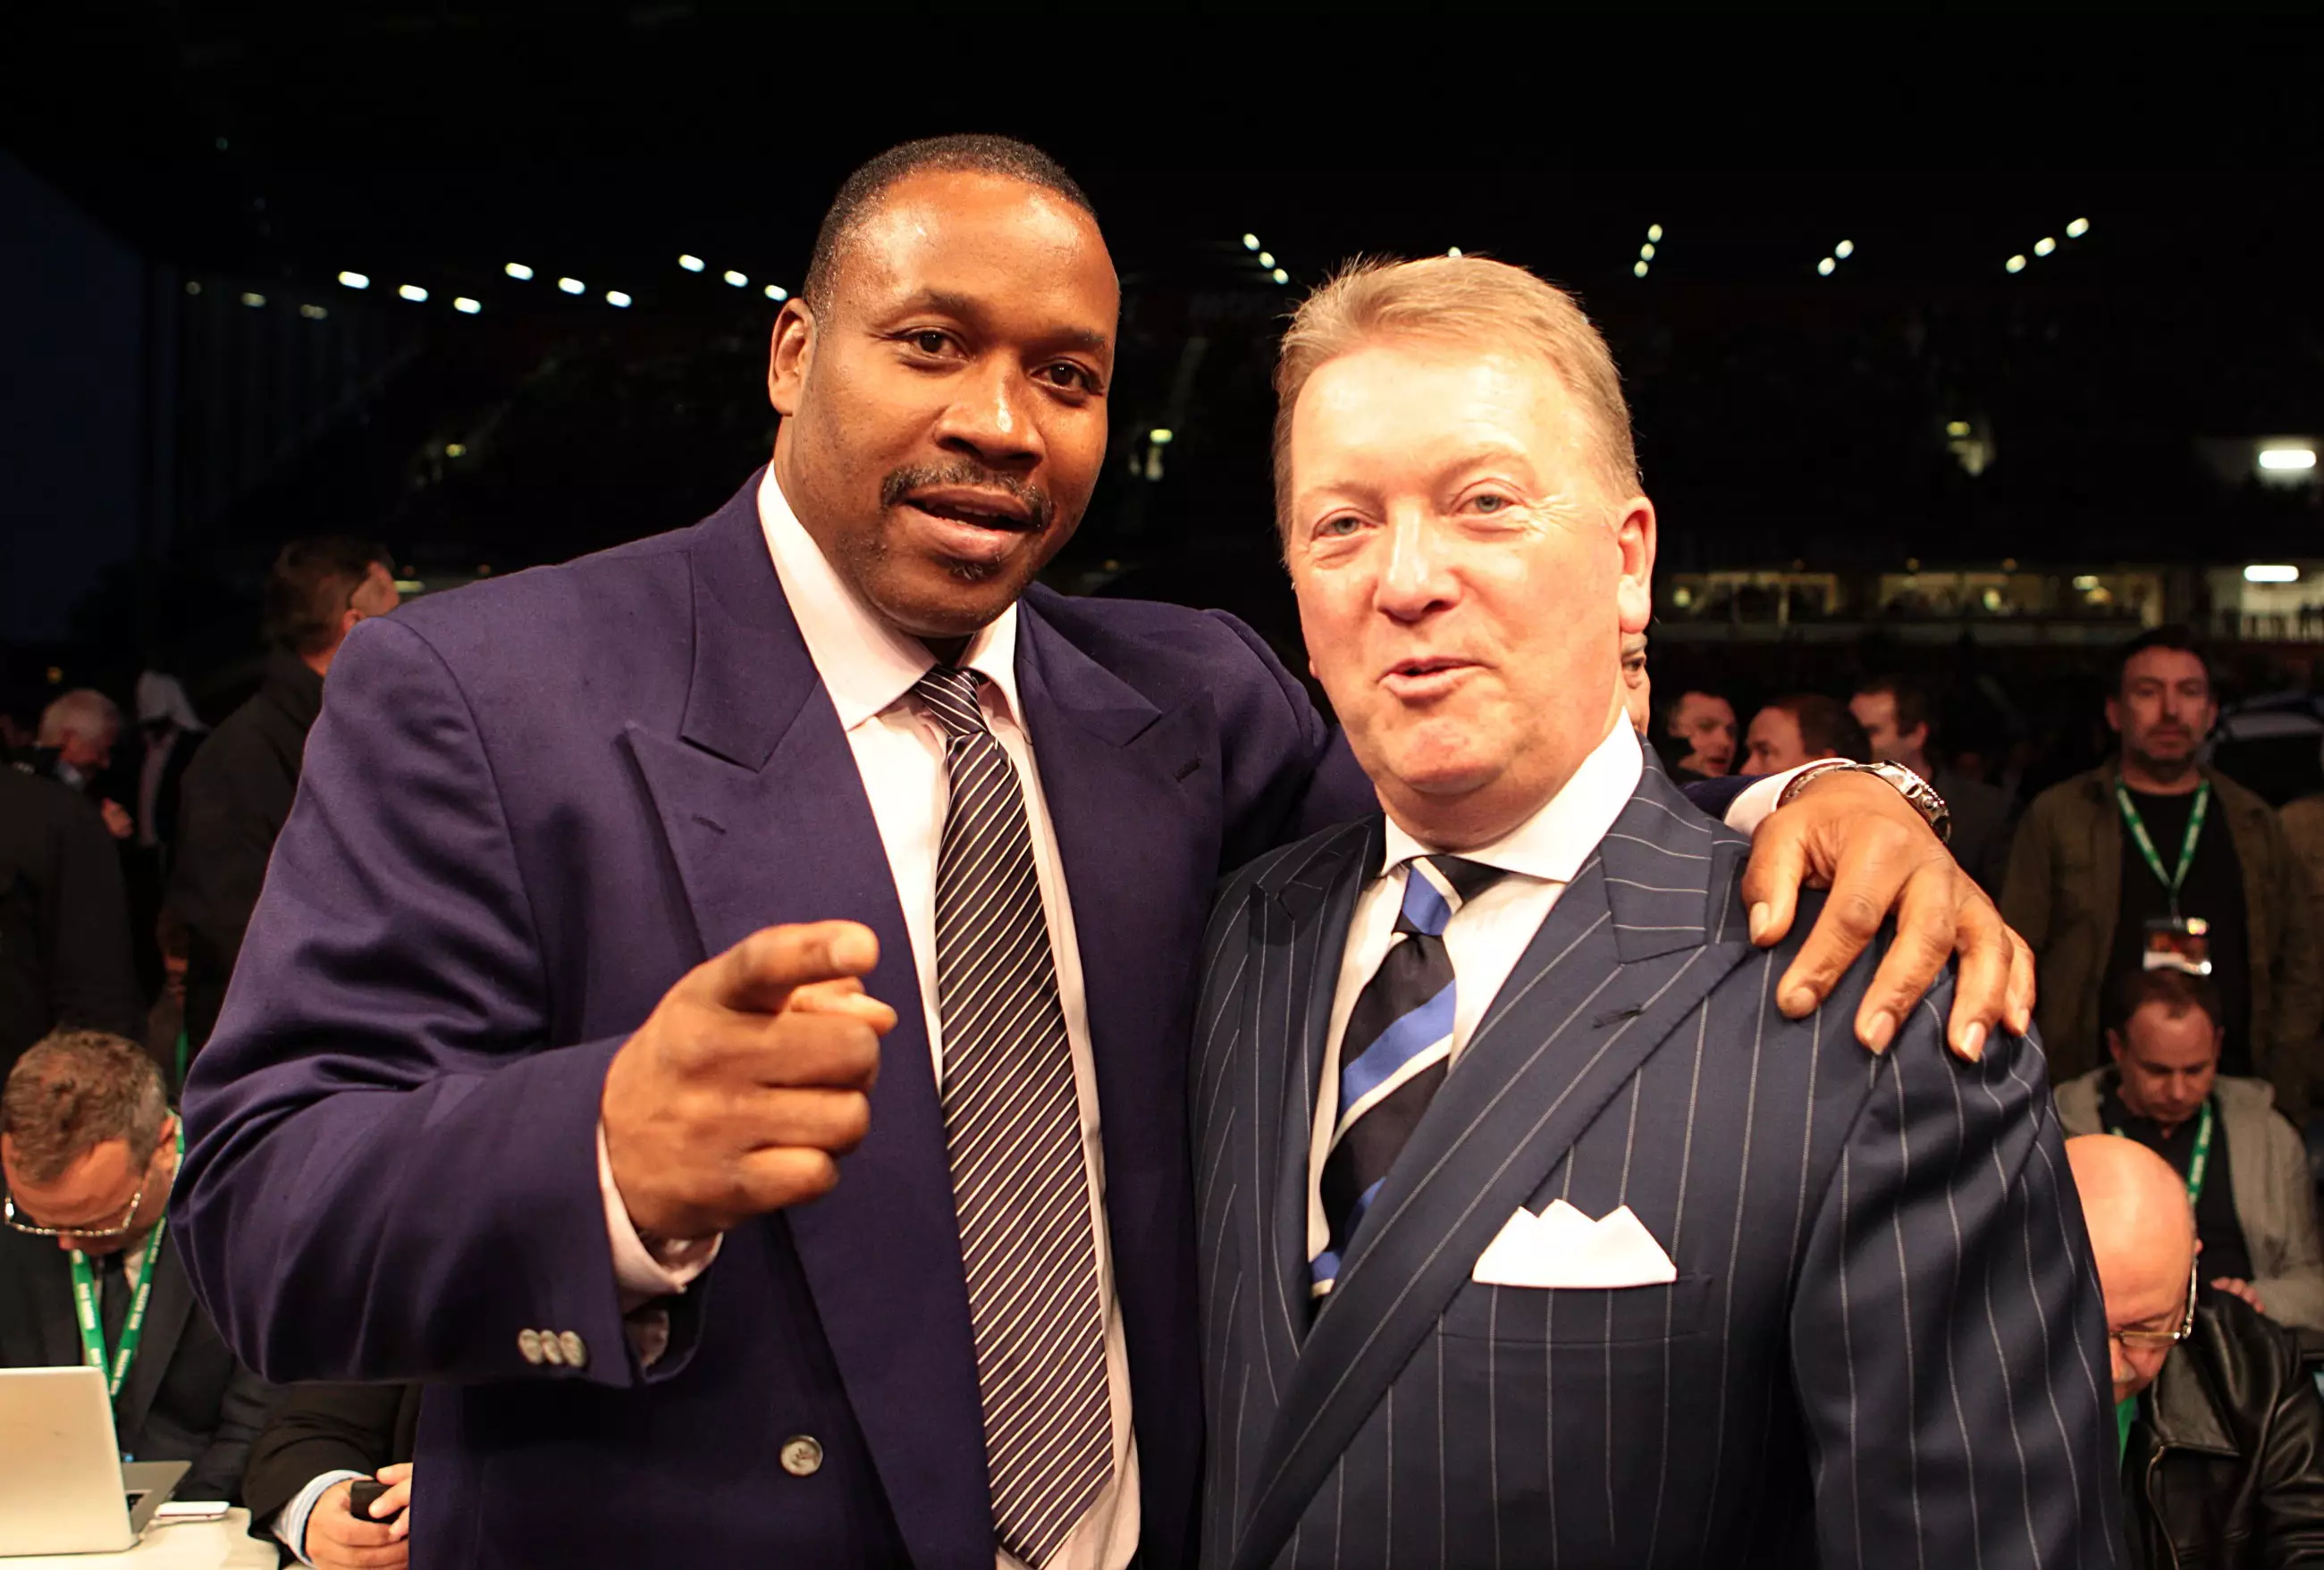 Tim Witherspoon (left) with promoter Frank Warren (right) back in 2012. (Image